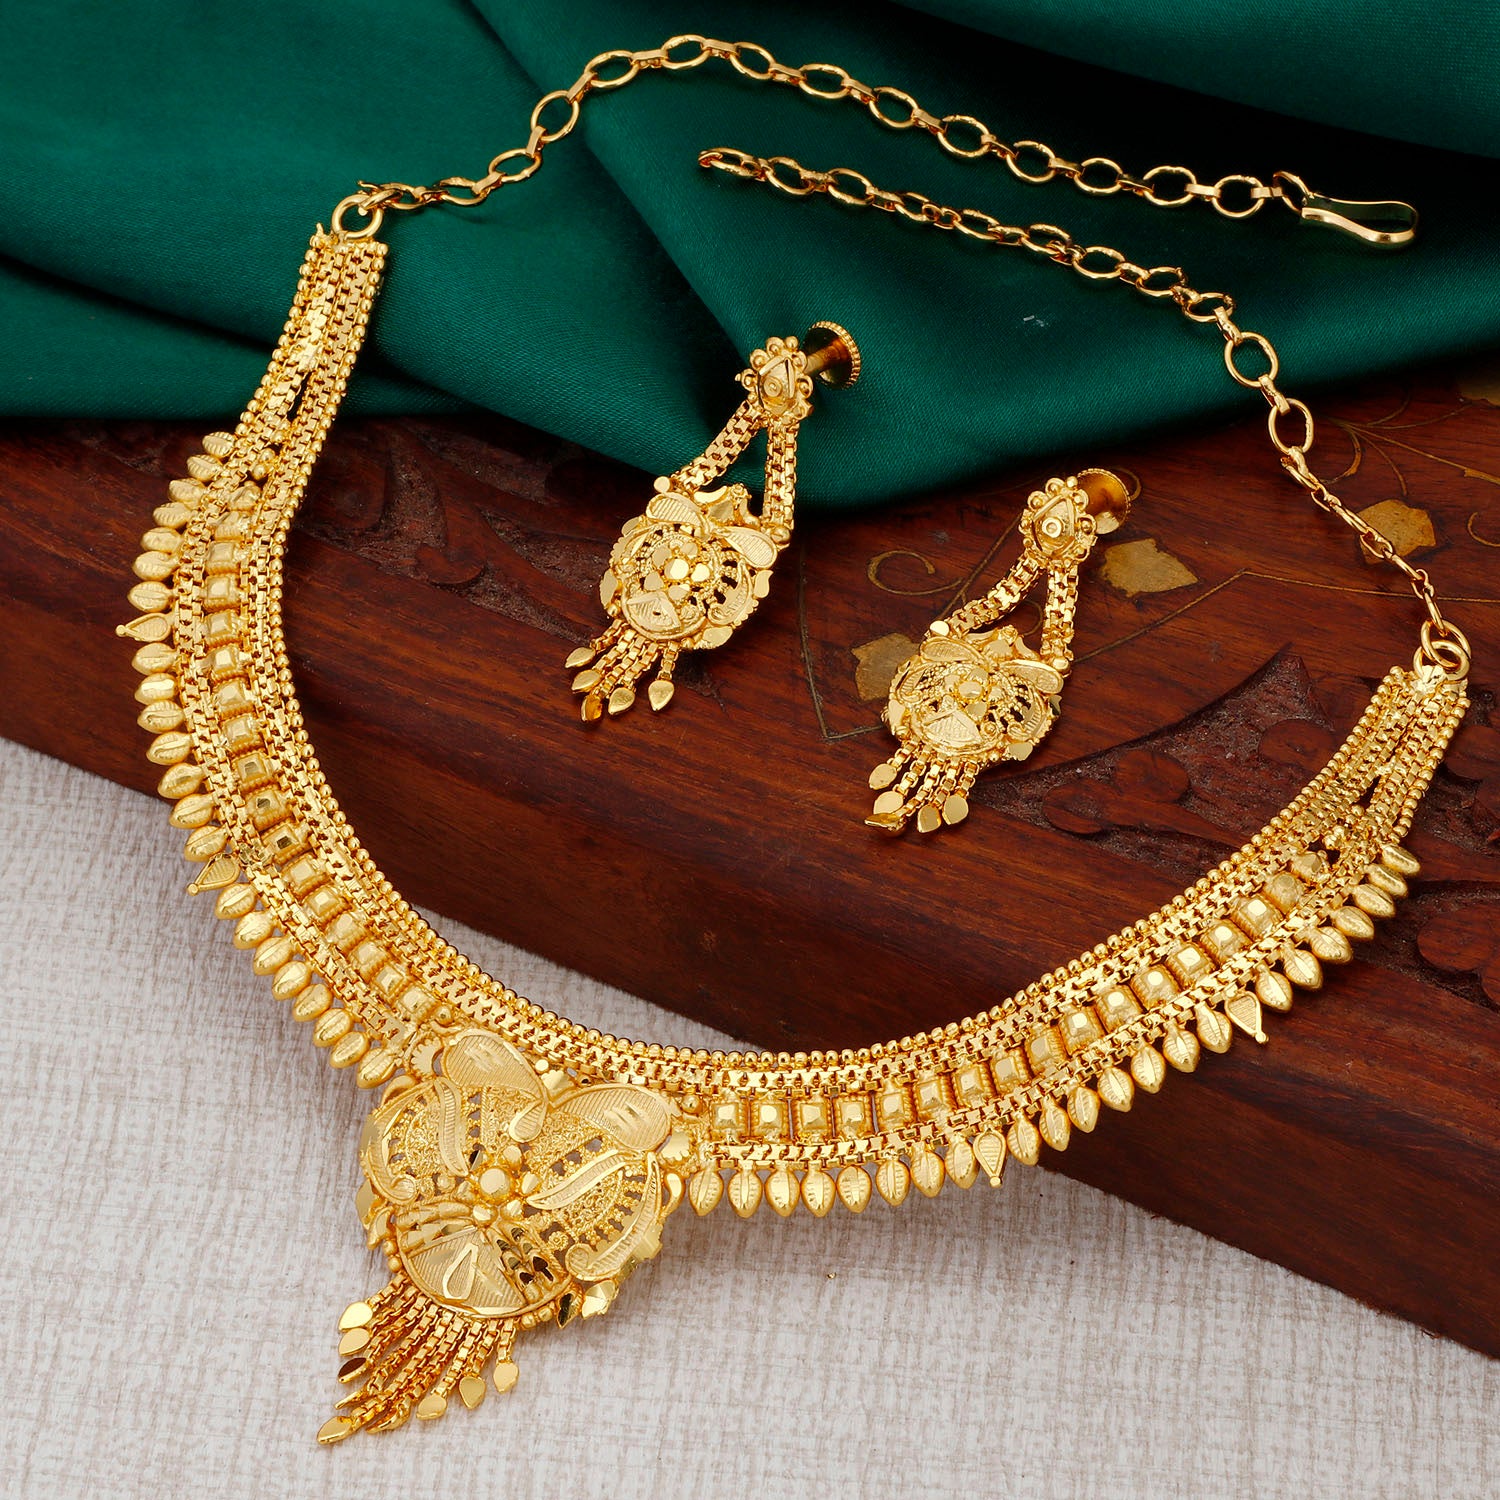 1 Gram Gold Jewellery Collections - South India Jewels